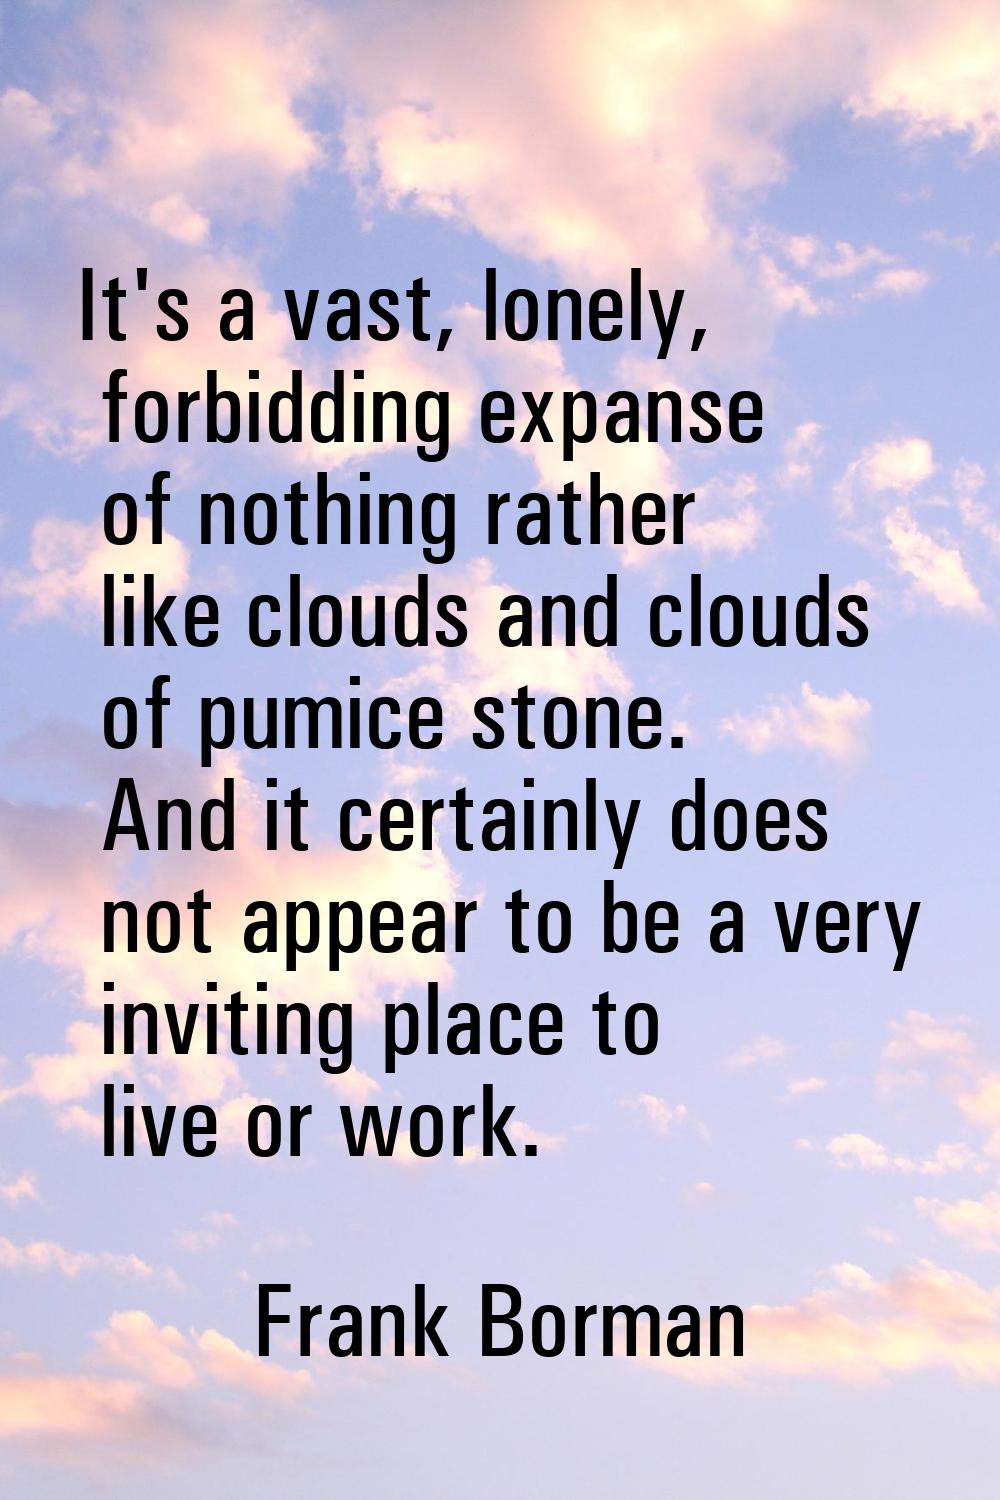 It's a vast, lonely, forbidding expanse of nothing rather like clouds and clouds of pumice stone. A